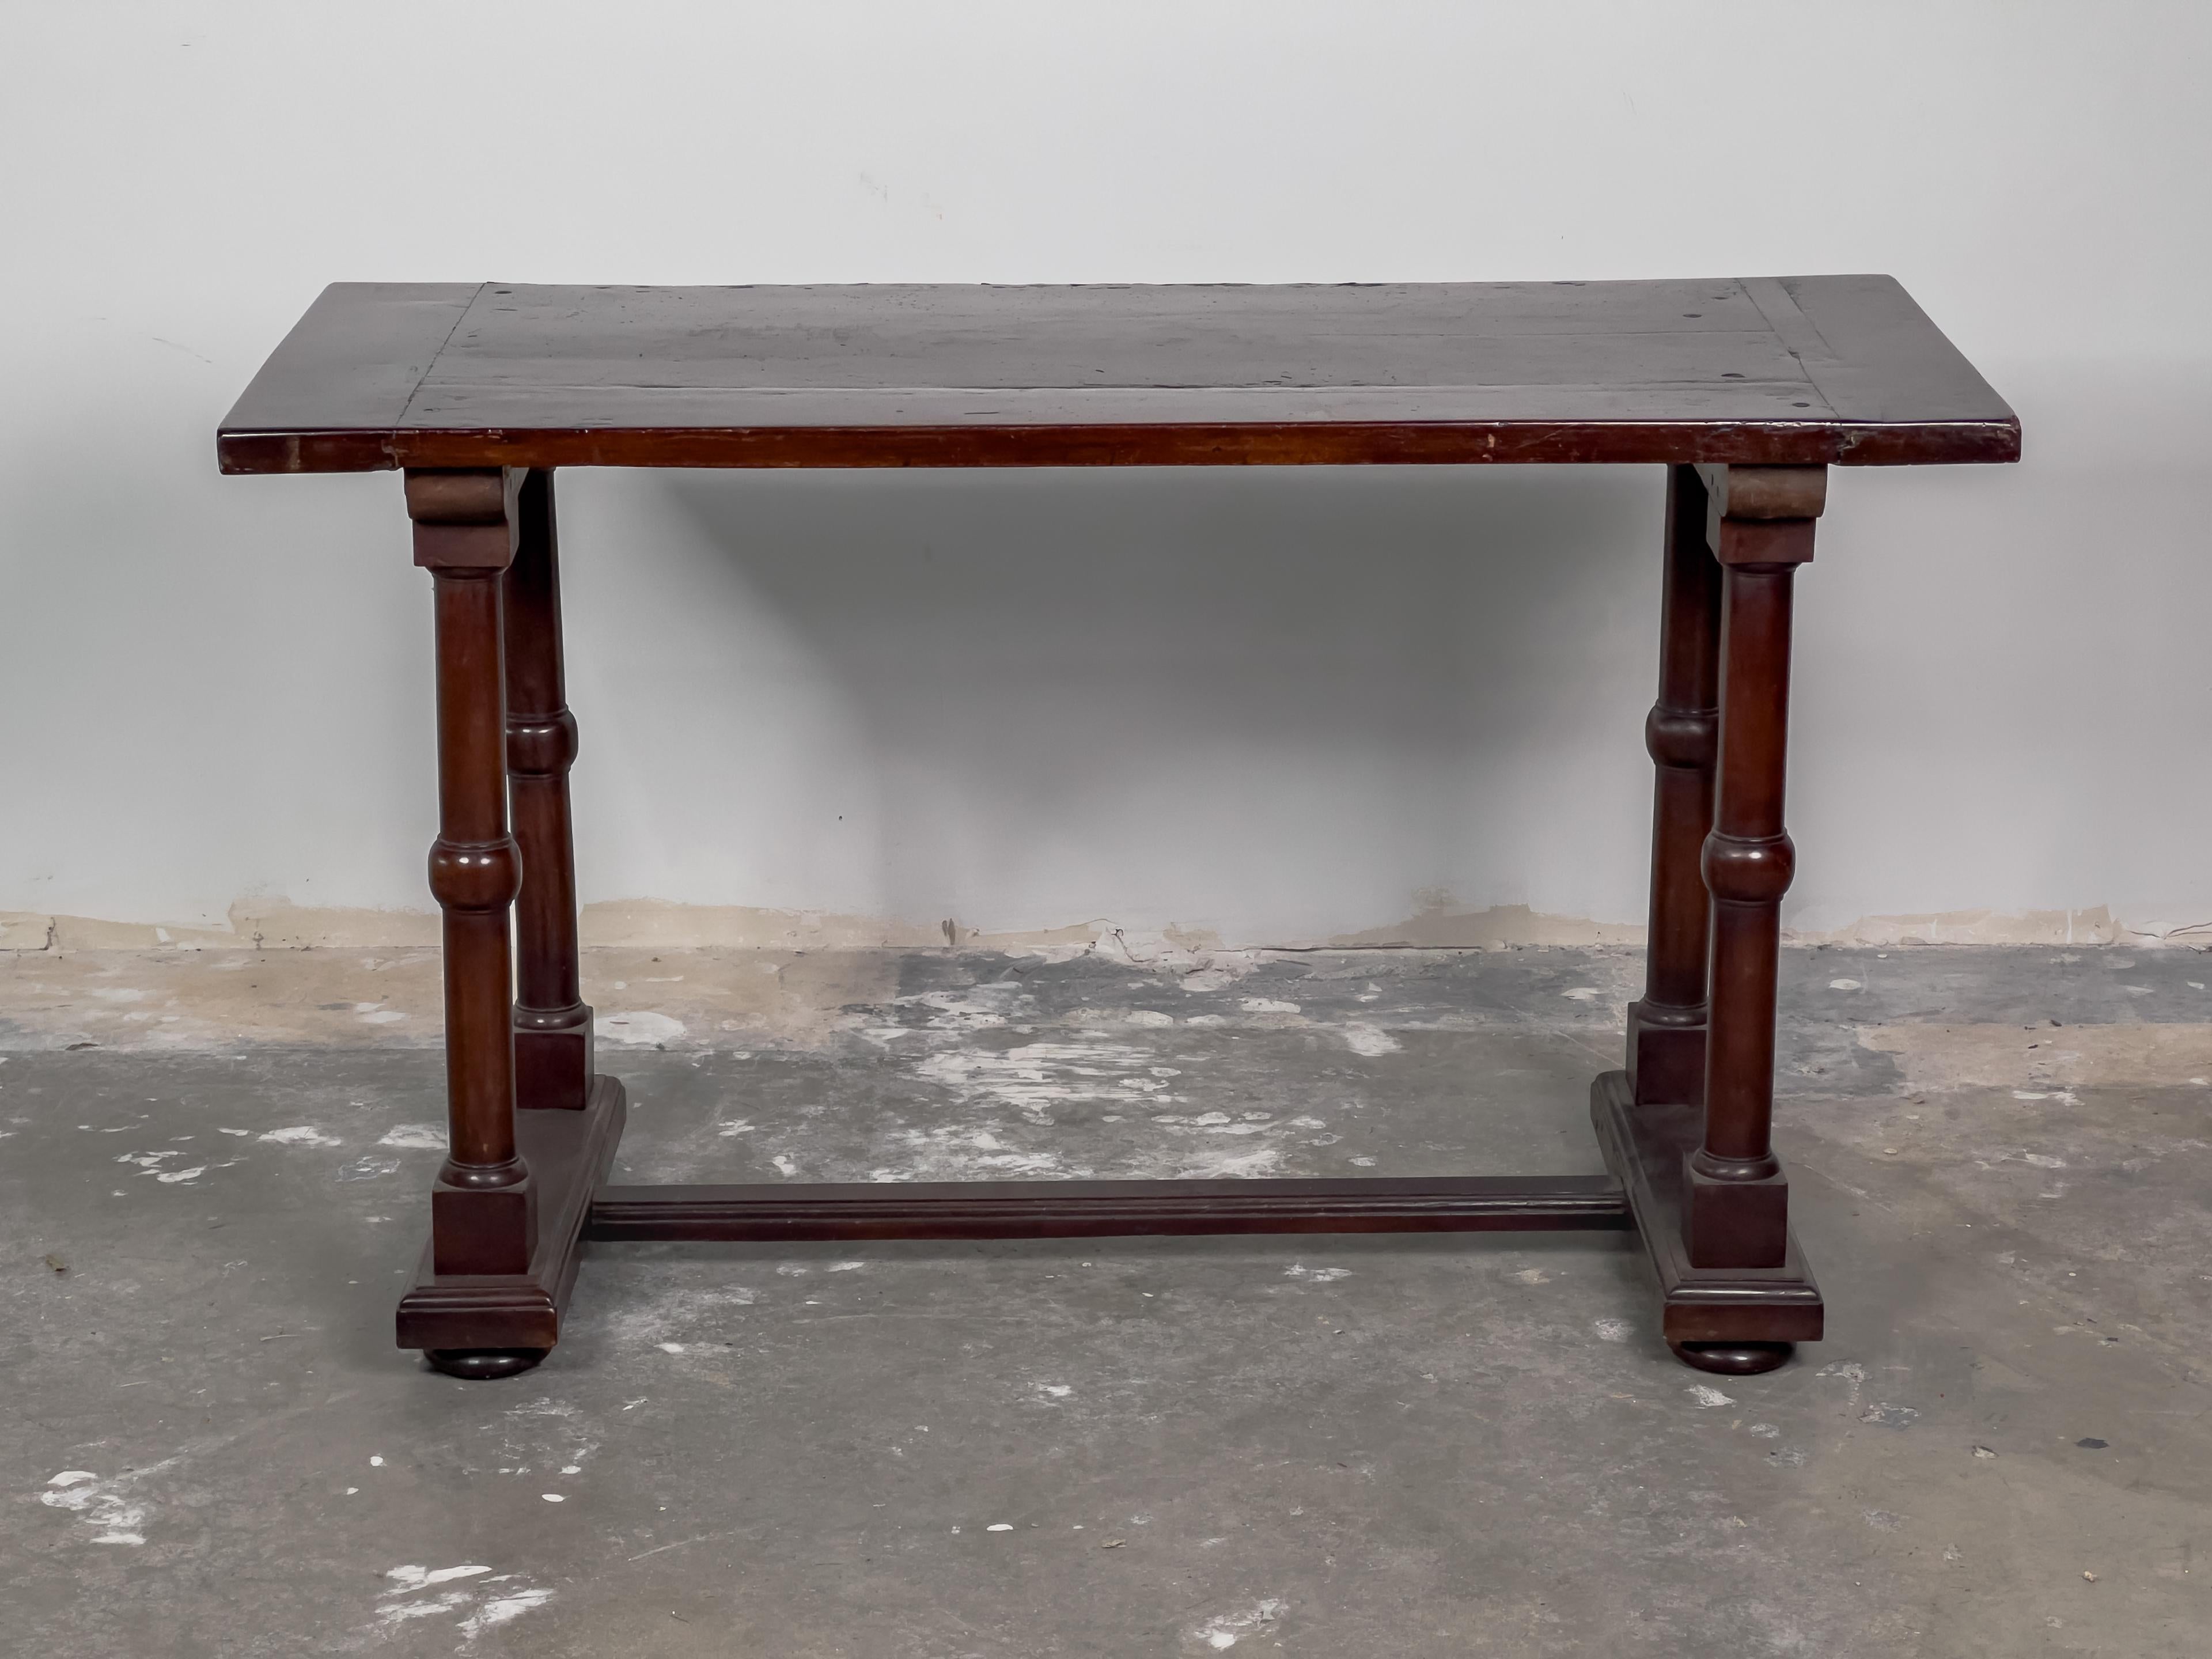 This 19th Century Italian Walnut Console Table exudes timeless elegance and exquisite craftsmanship. Crafted from rich walnut wood, it boasts a luxurious depth of color and a lustrous sheen that highlights the natural beauty of the wood grain. The